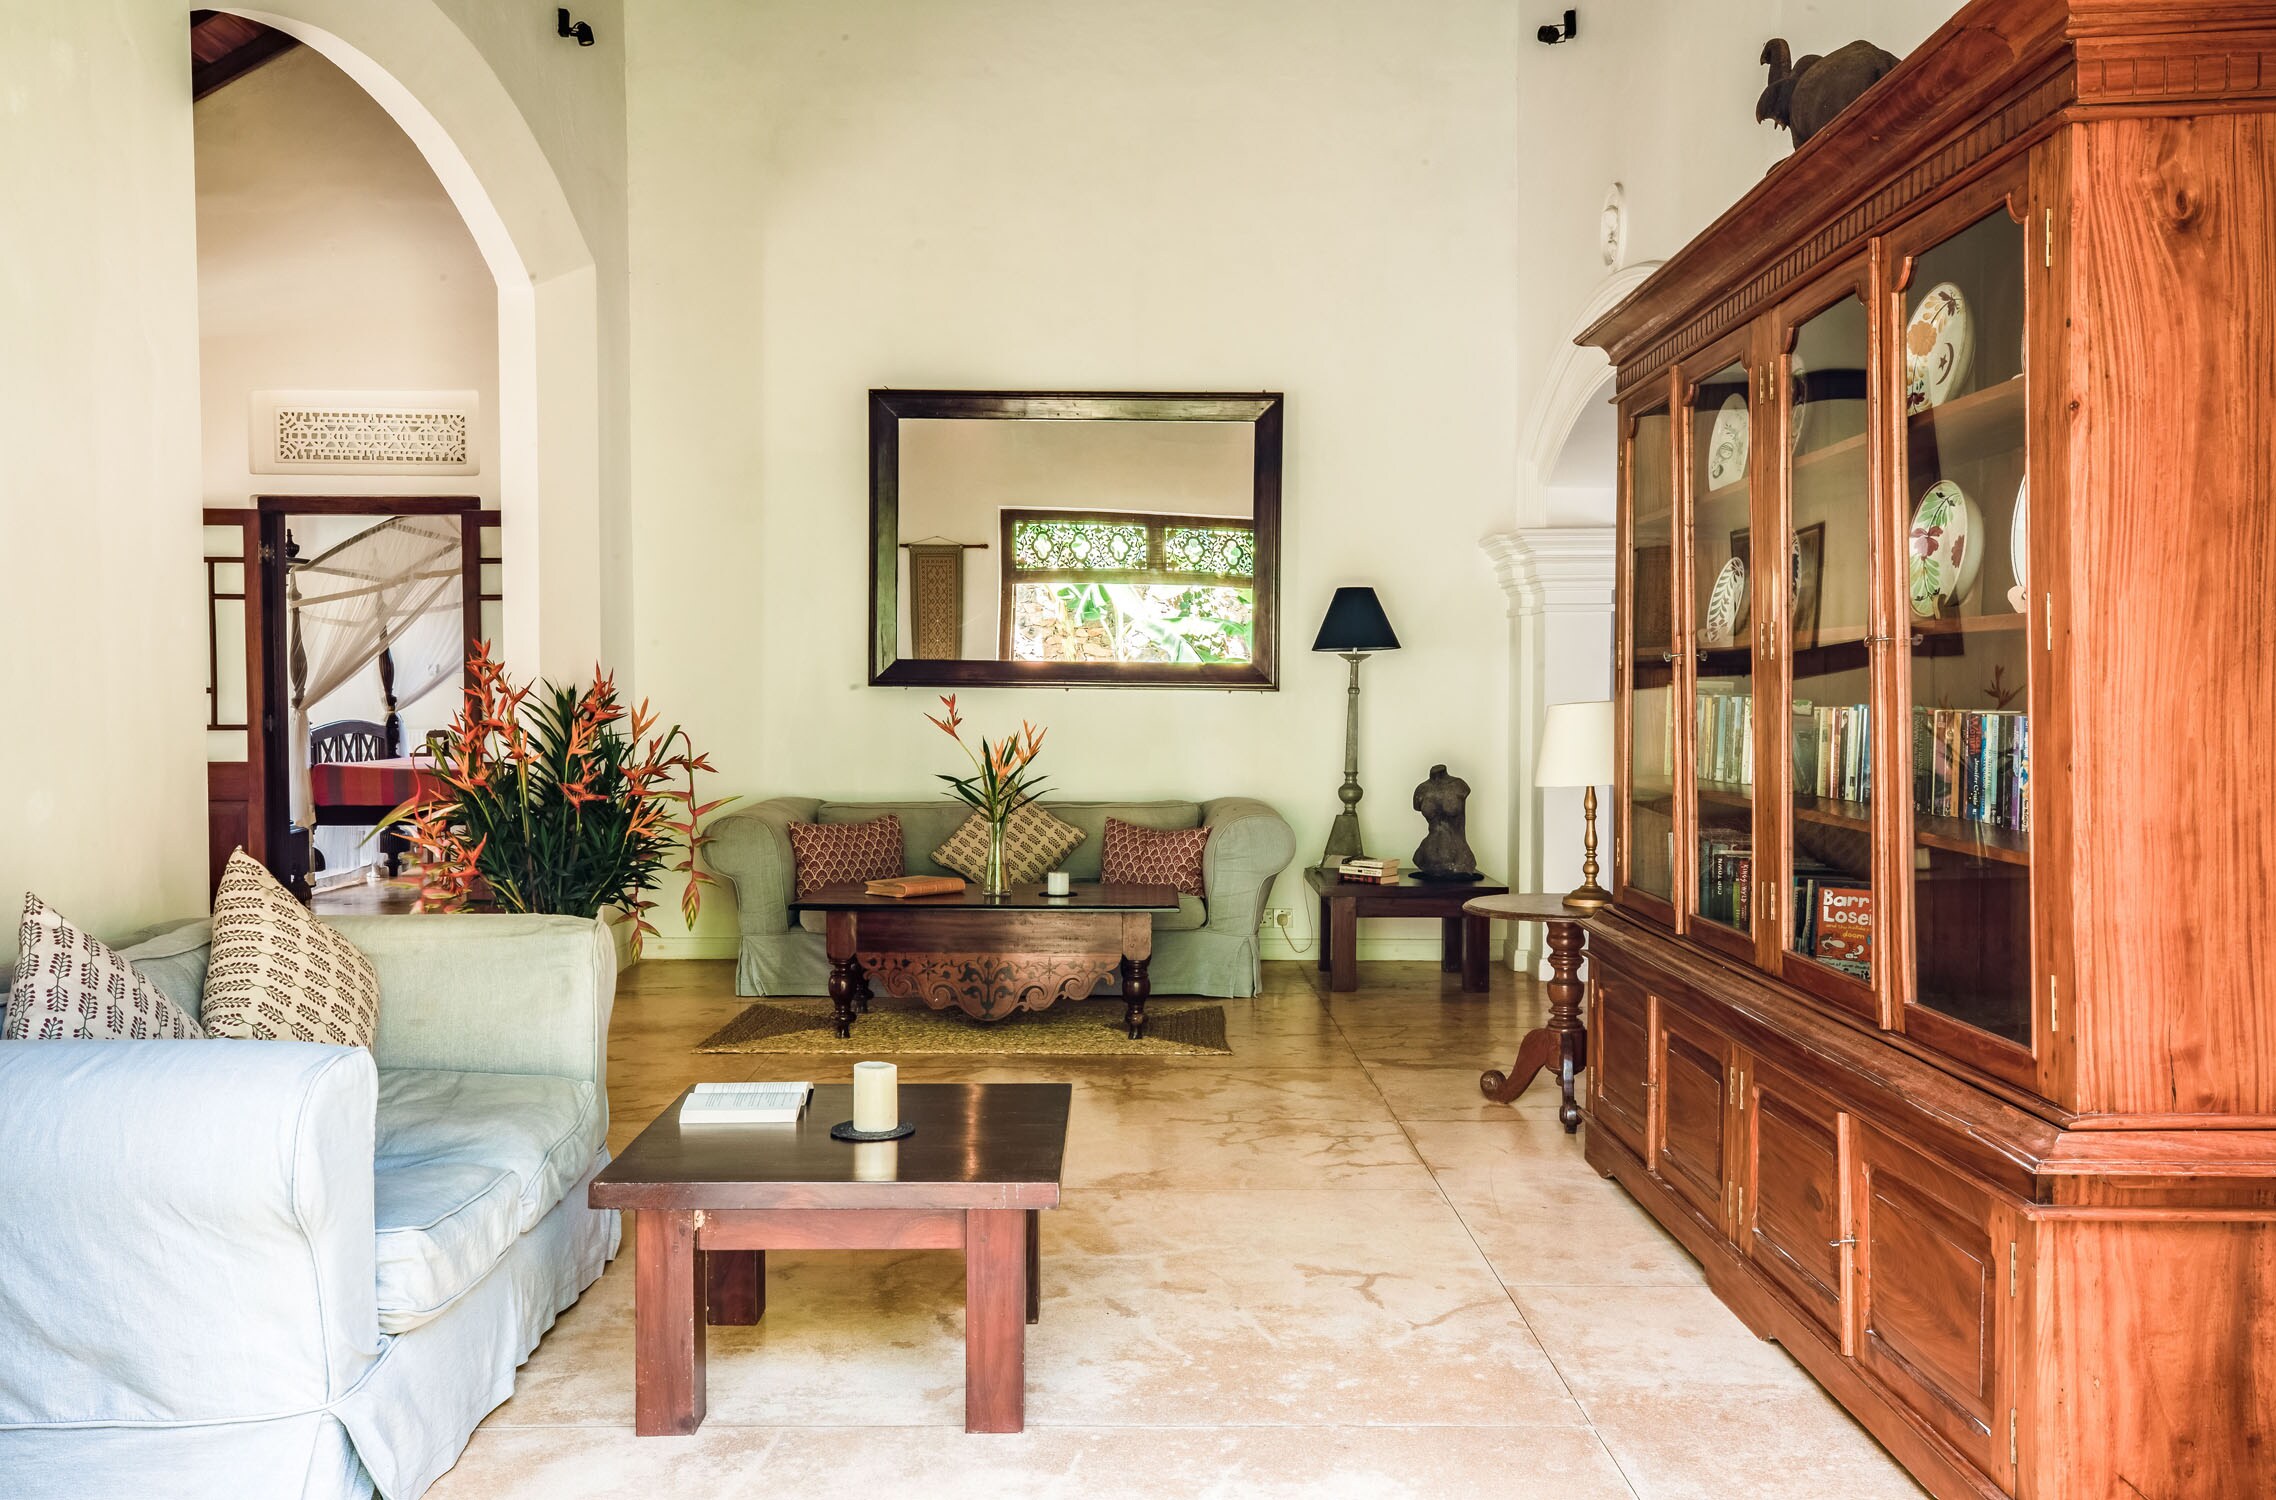 Traditional 4 Bedroom Village House with a large pool located close to surf breaks & restaurants 